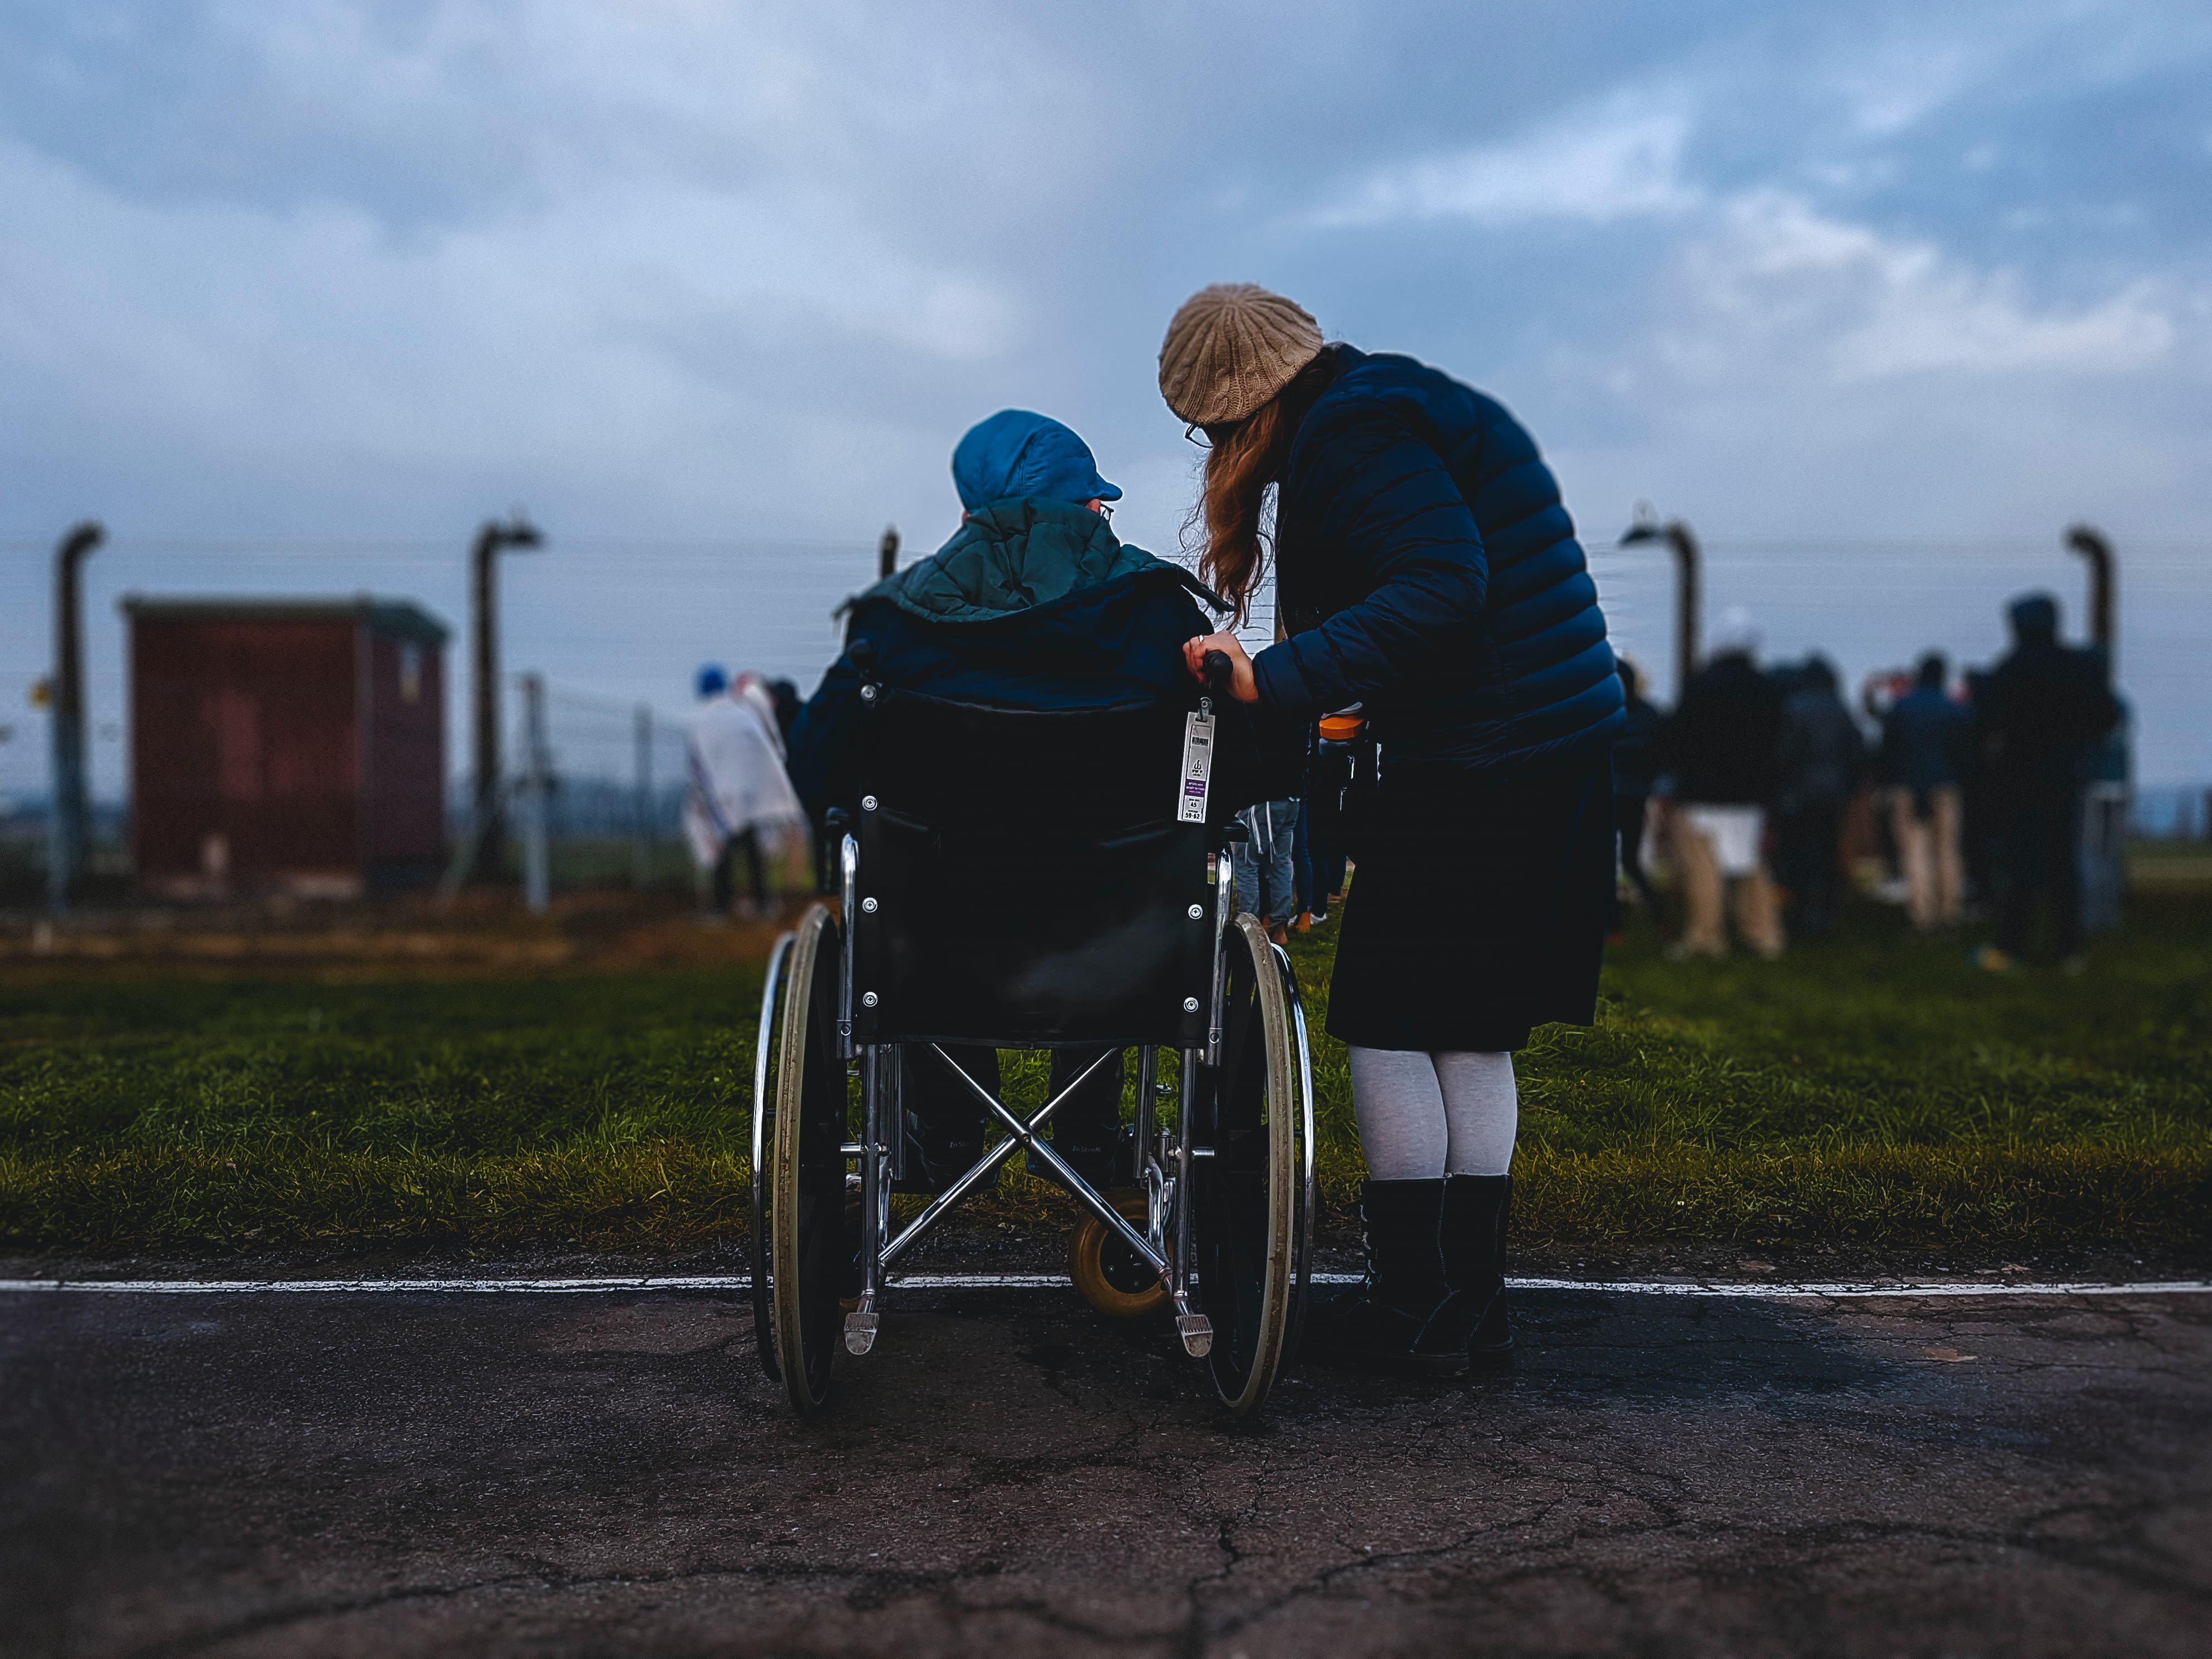 A woman looks after someone in a wheelchair